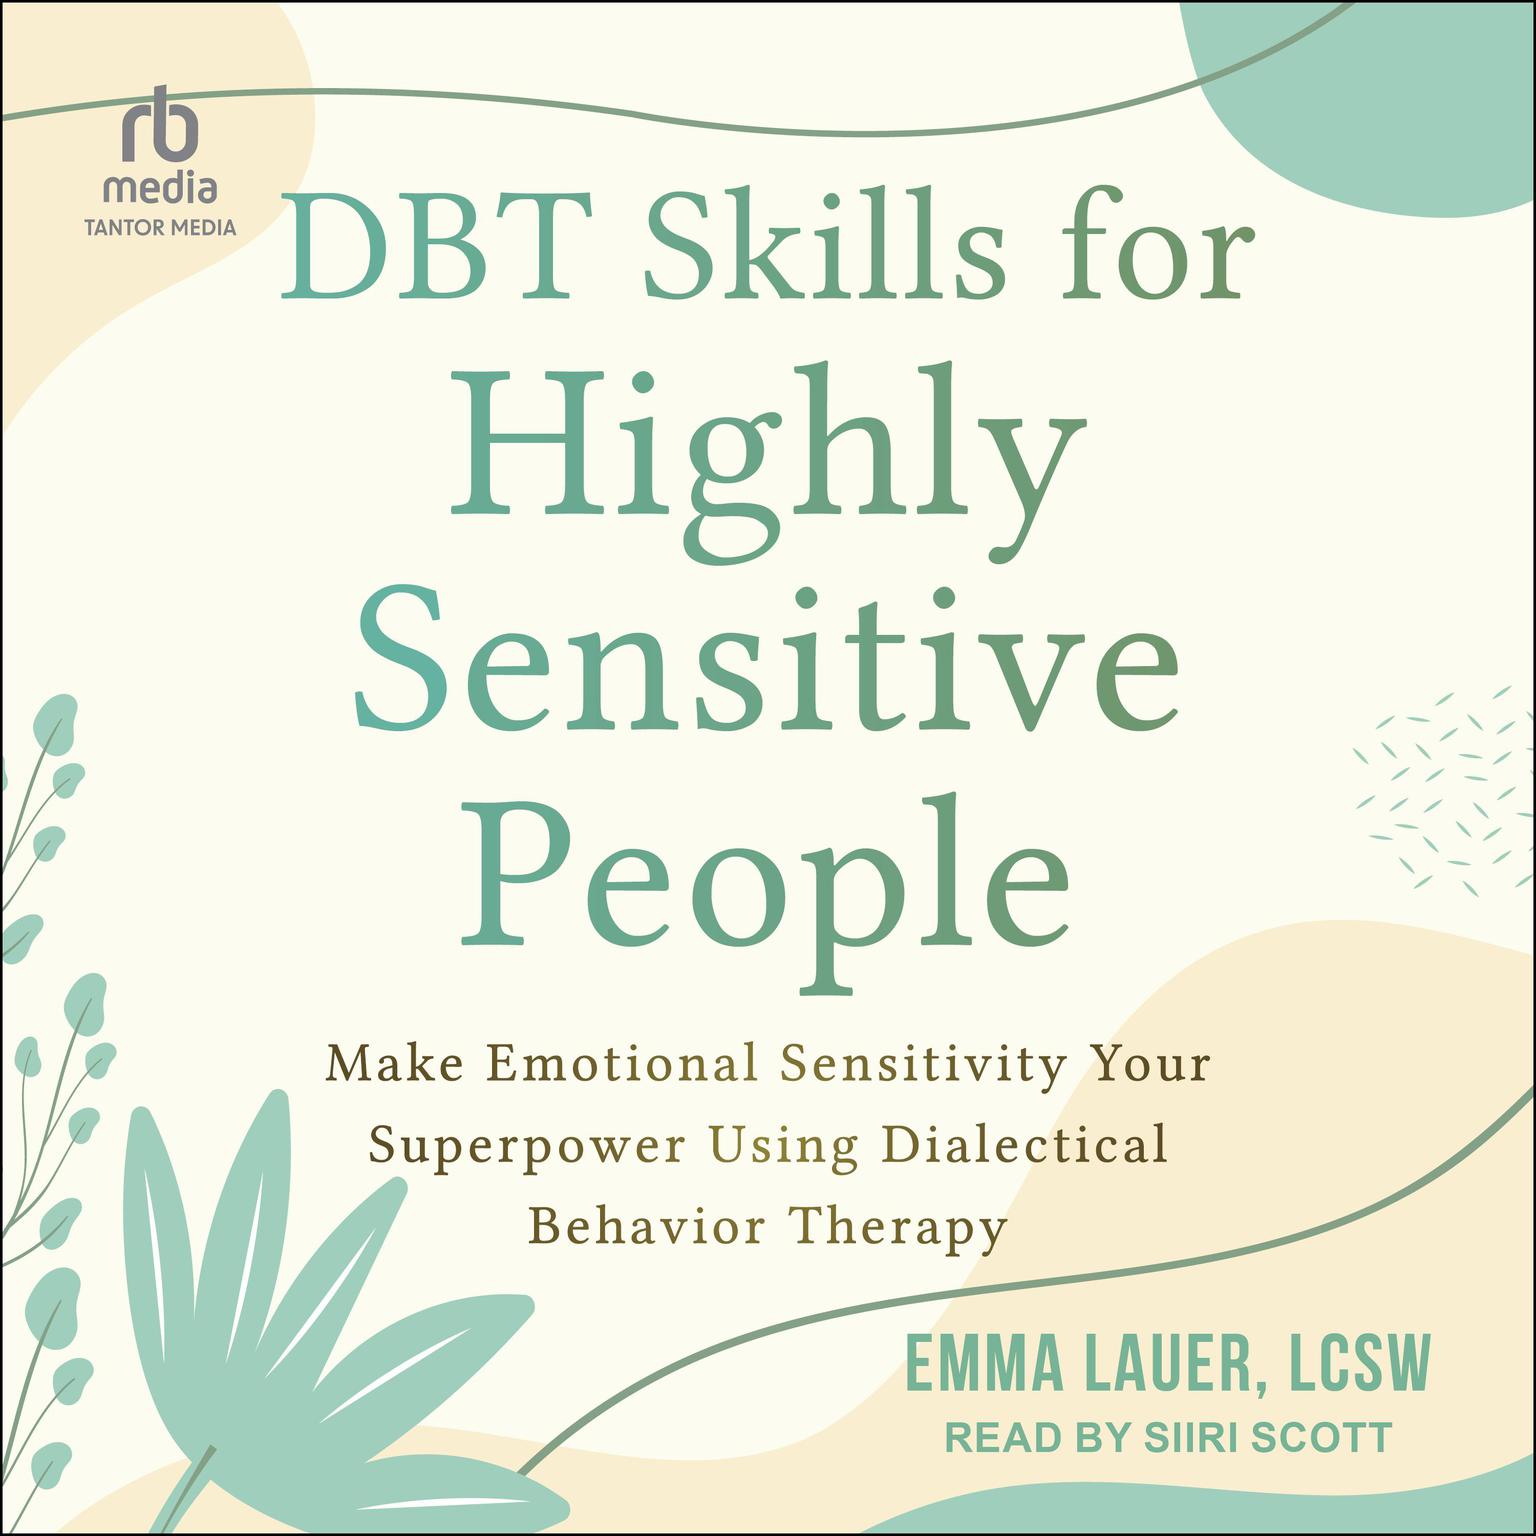 DBT Skills for Highly Sensitive People: Make Emotional Sensitivity Your Superpower Using Dialectical Behavior Therapy Audiobook, by Emma Lauer, LCSW